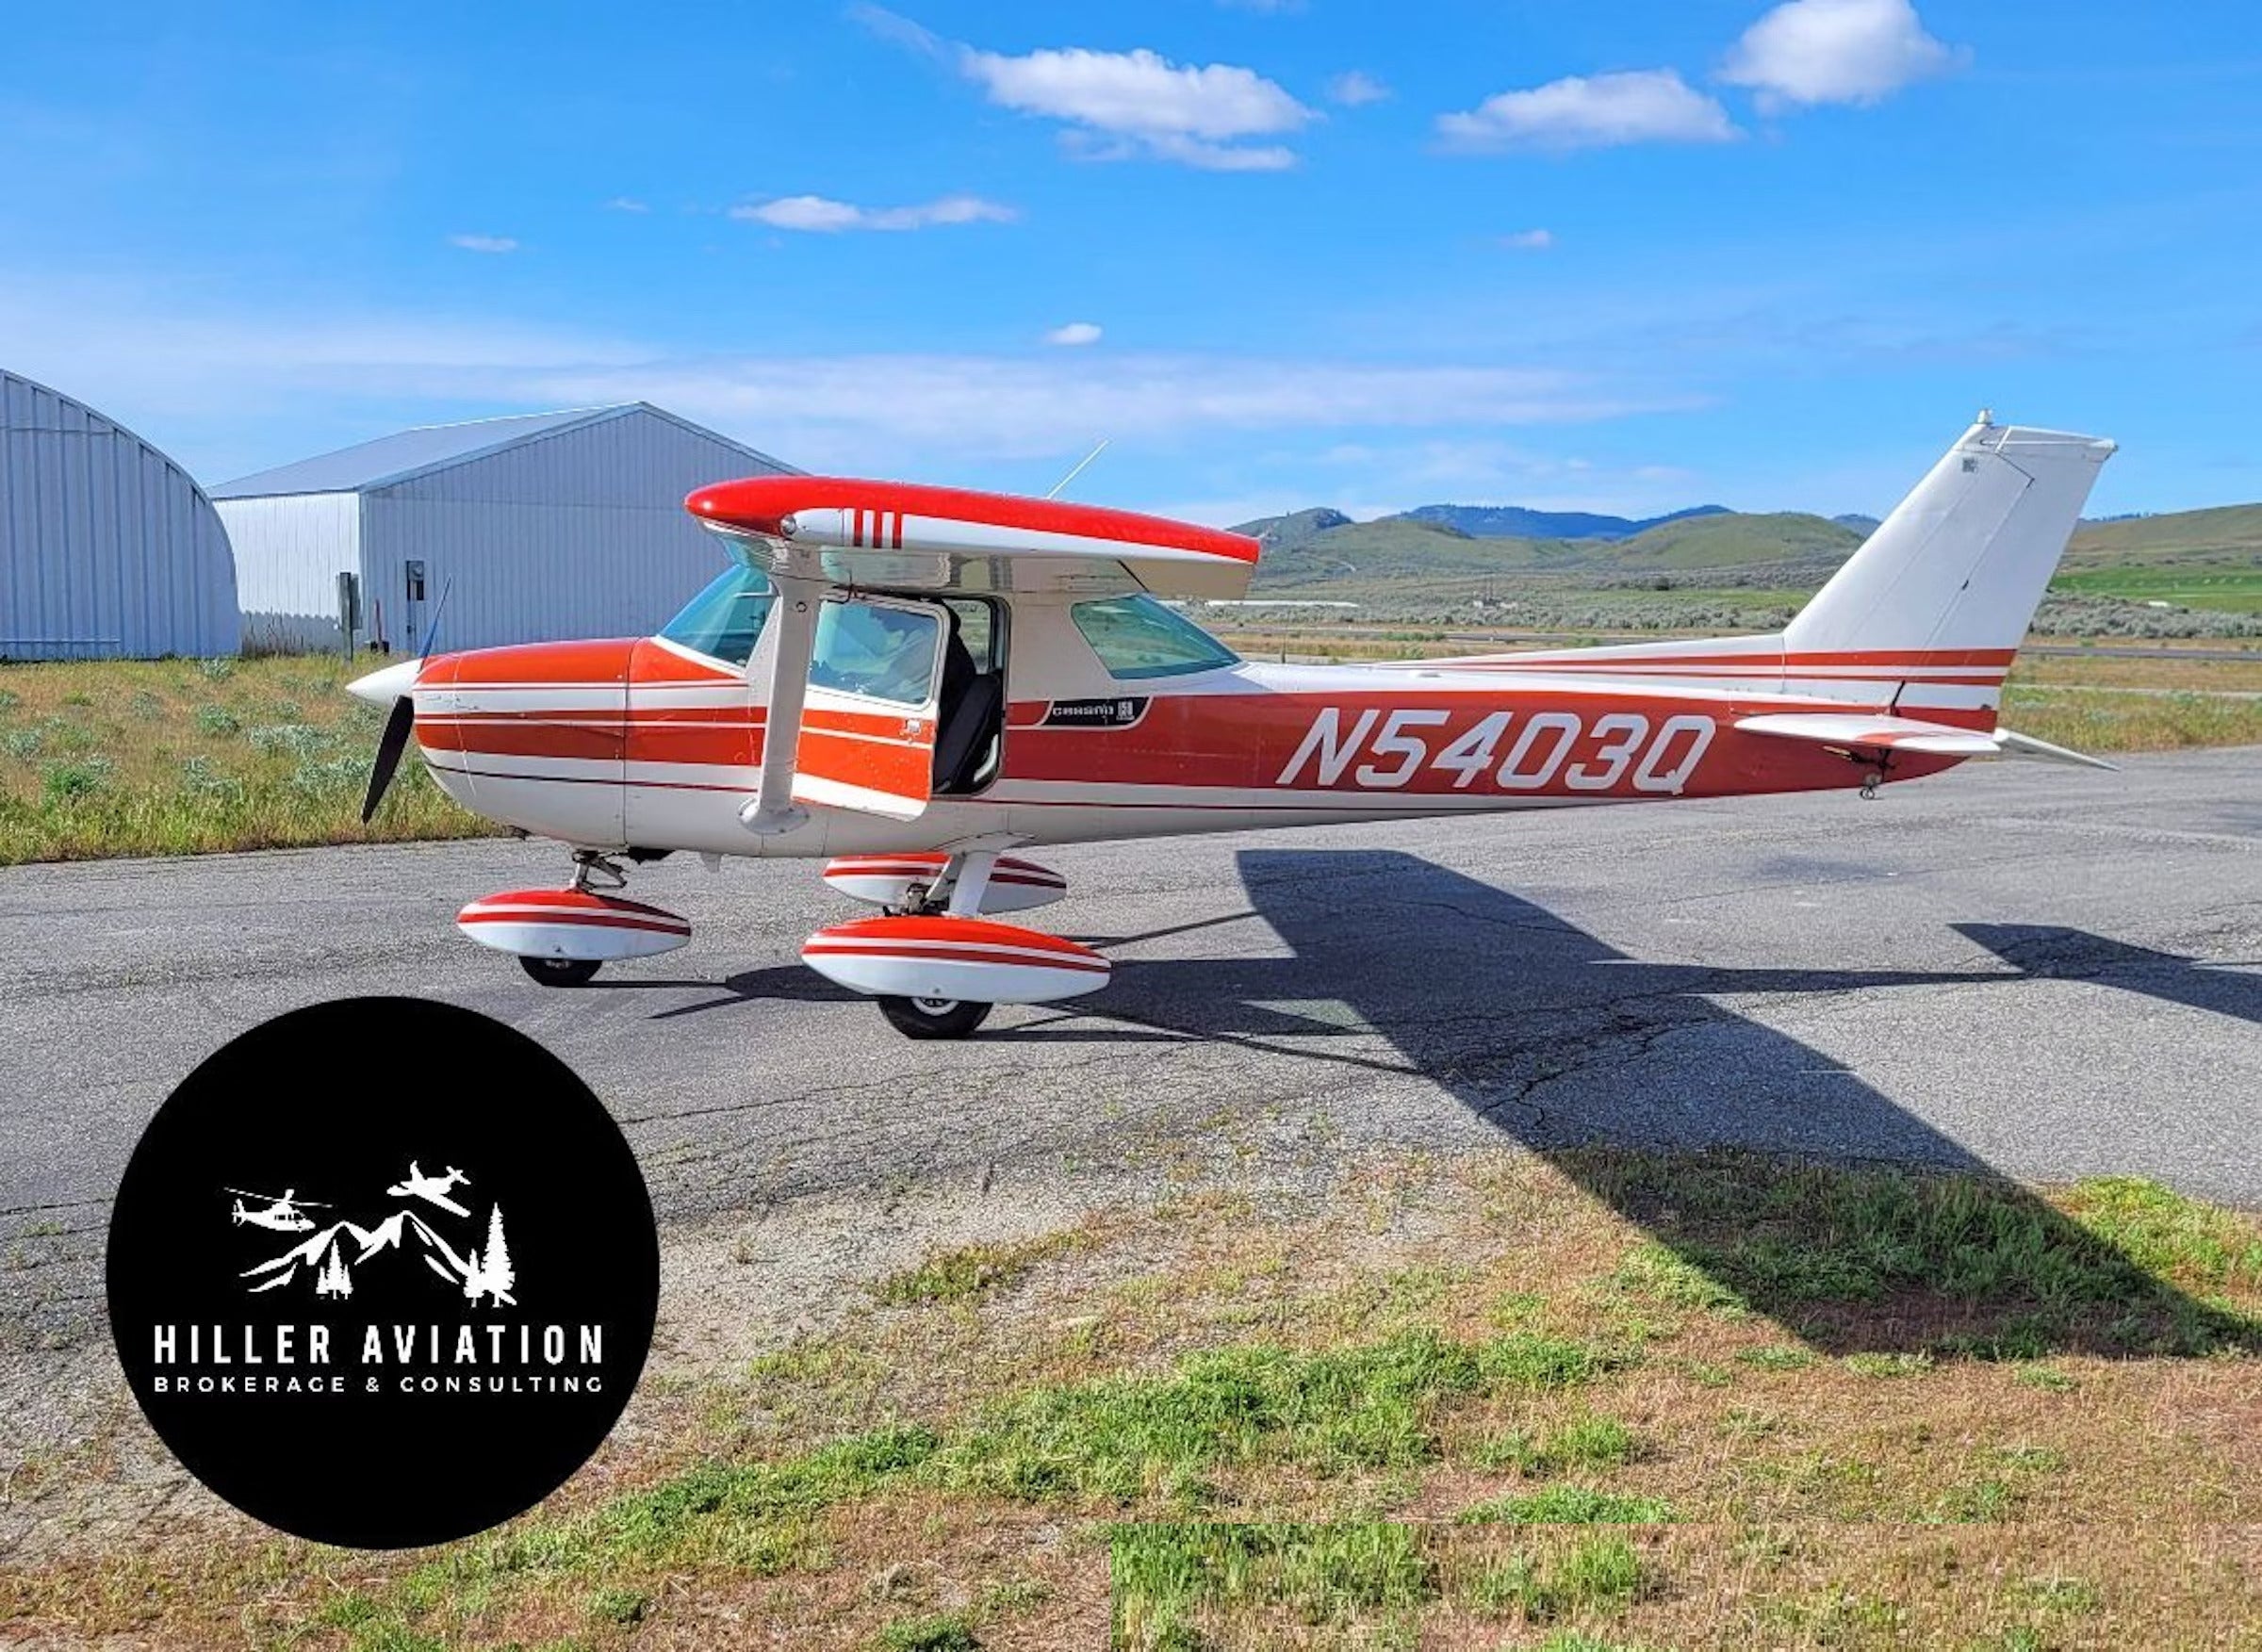 This 1972 Cessna 150L Is a Rugged, Versatile ‘AircraftForSale’ Top Pick